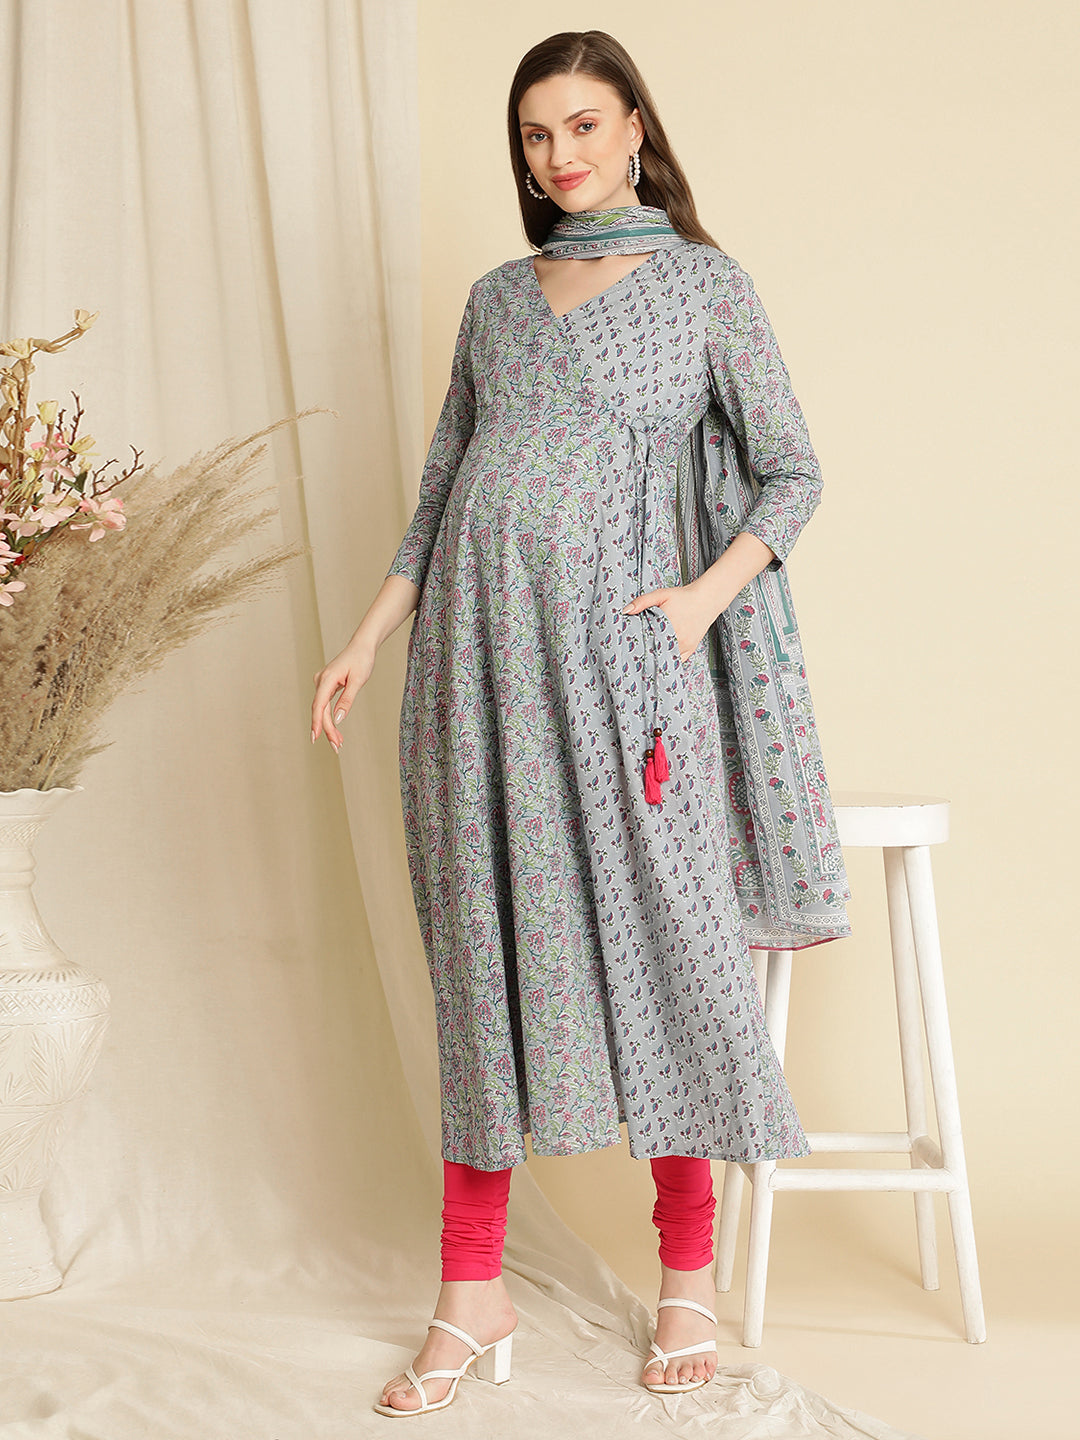 2019 Maxi Cotton Maternity Gown For Photography Shoots Elegant Pregnancy  Maternity Photoshoot Dress For Women Q0713 From Sihuai04, $21.79 |  DHgate.Com